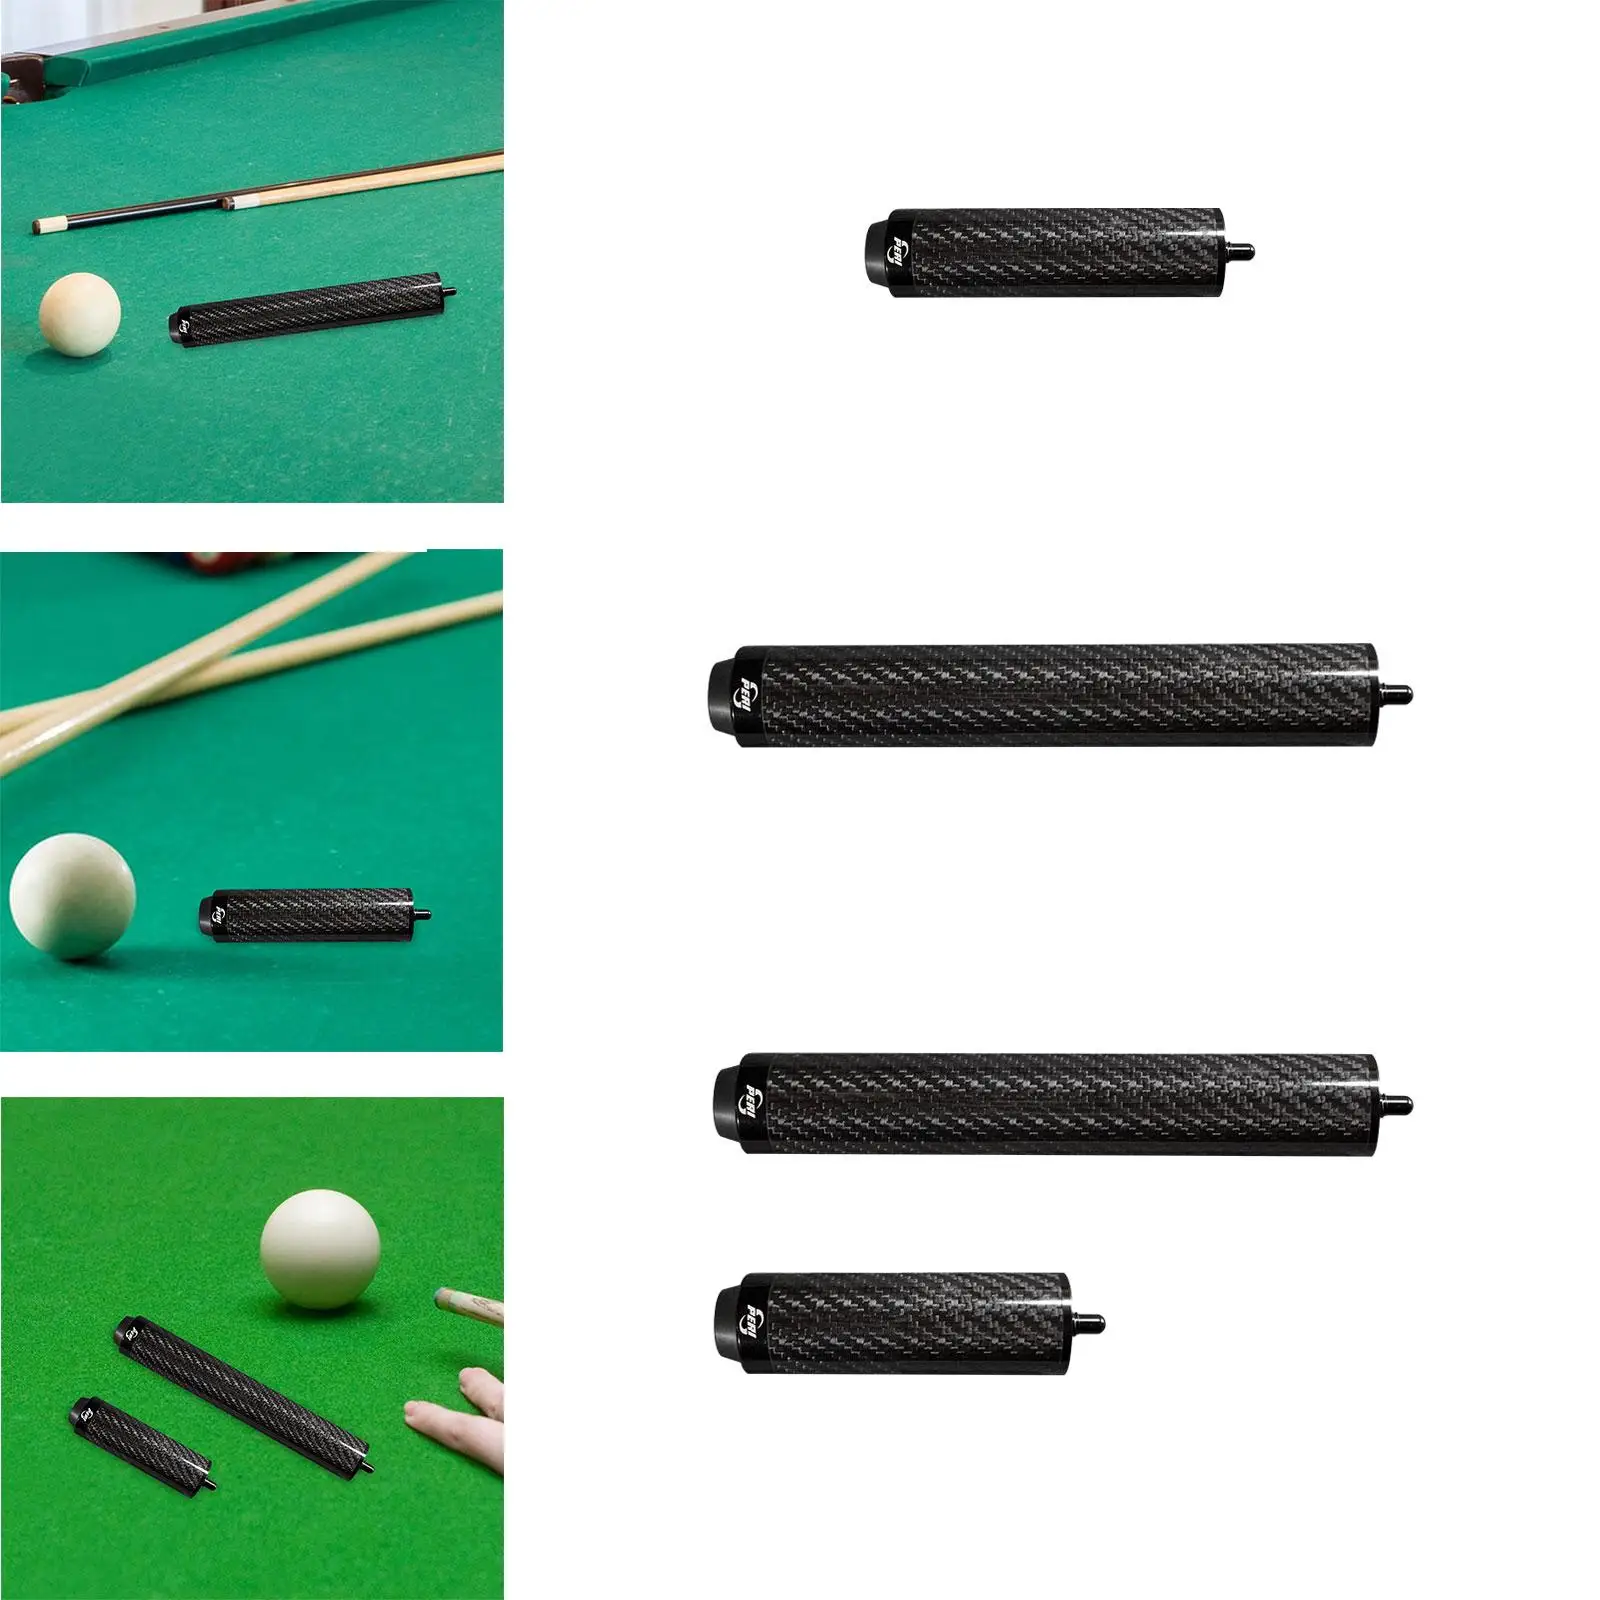 Billiards Pool Cue Extension Enthusiast Professional Cue Stick Extender